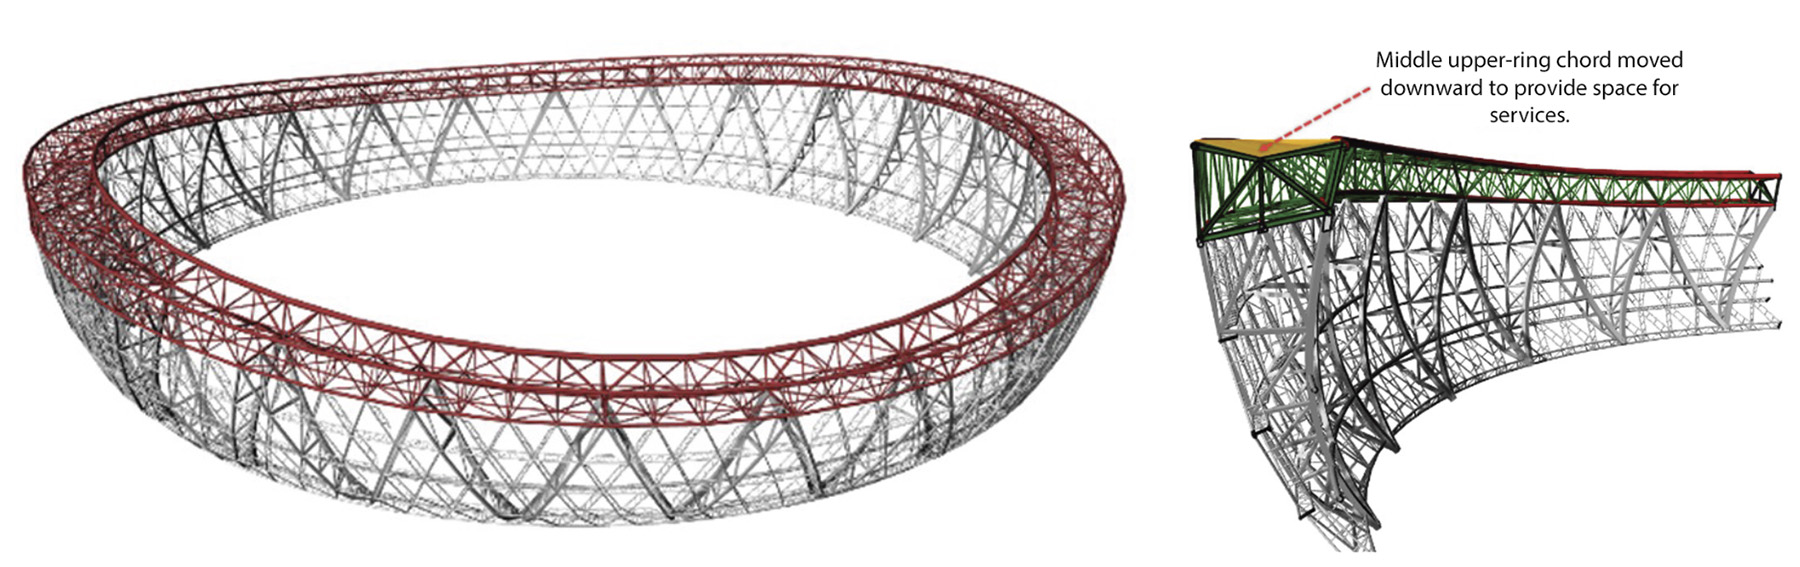 The rendering shows a computer model overview and detail of the Lusail Stadium compression ring. 